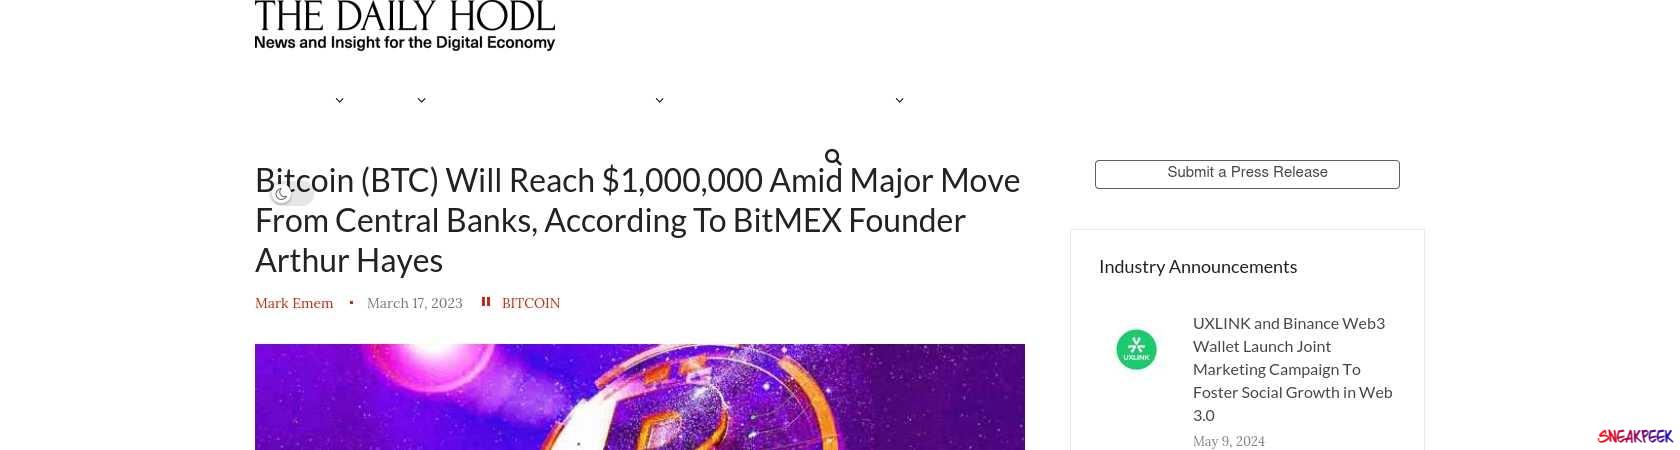 Read the full Article:  ⭲ Bitcoin (BTC) Will Reach $1,000,000 Amid Major Move From Central Banks, According To BitMEX Founder Arthur Hayes